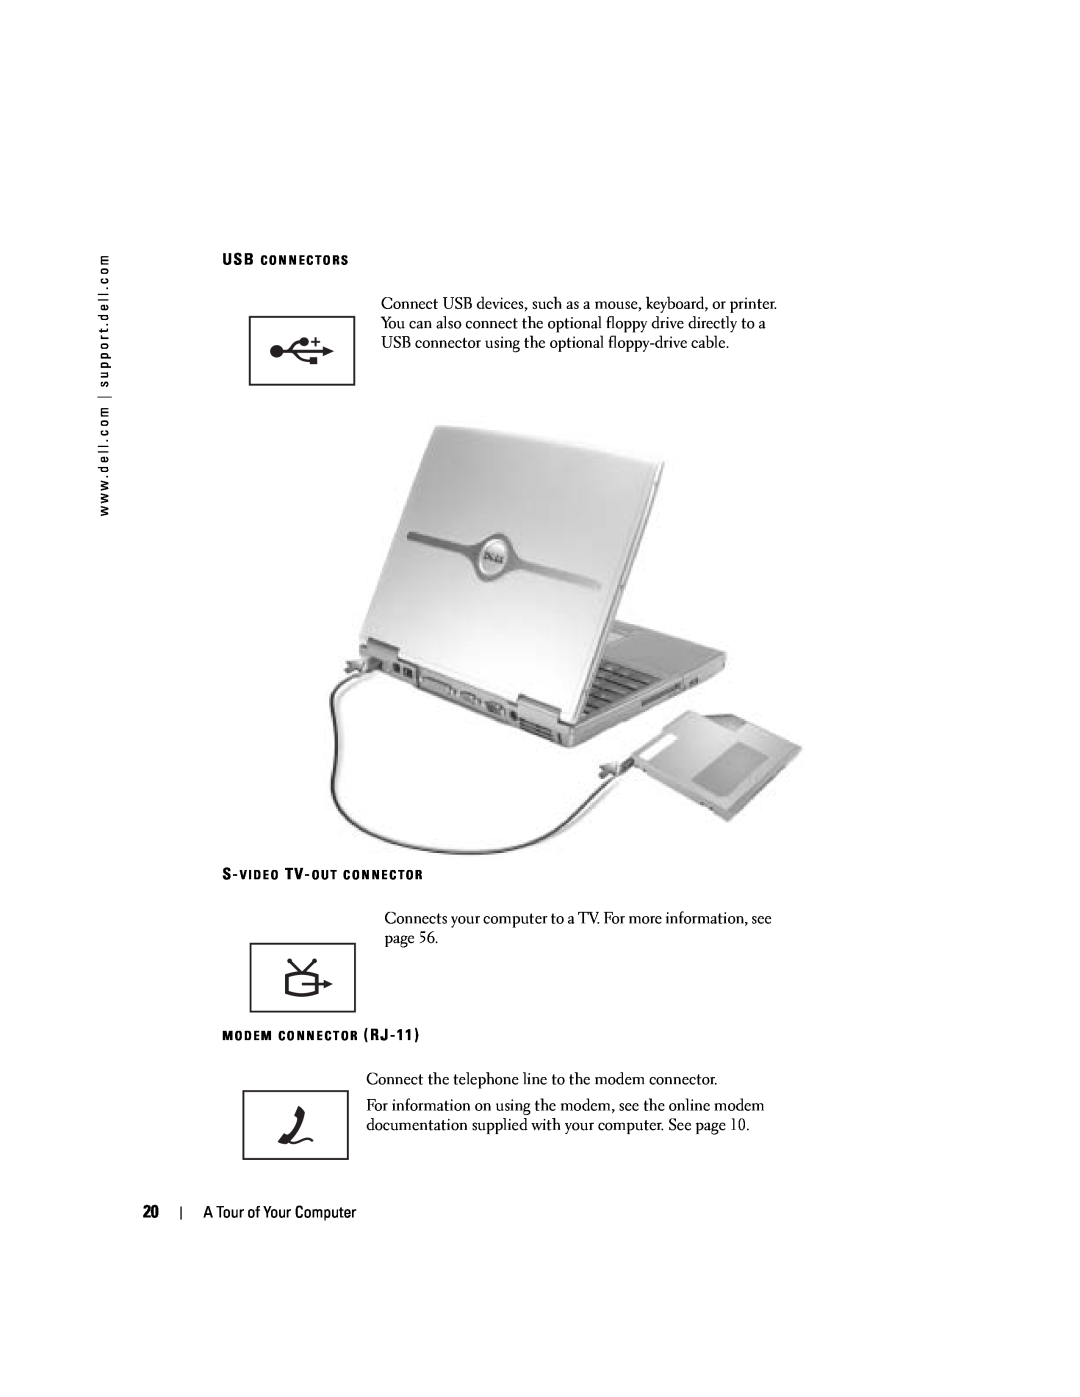 Dell PP10L owner manual Connect USB devices, such as a mouse, keyboard, or printer 